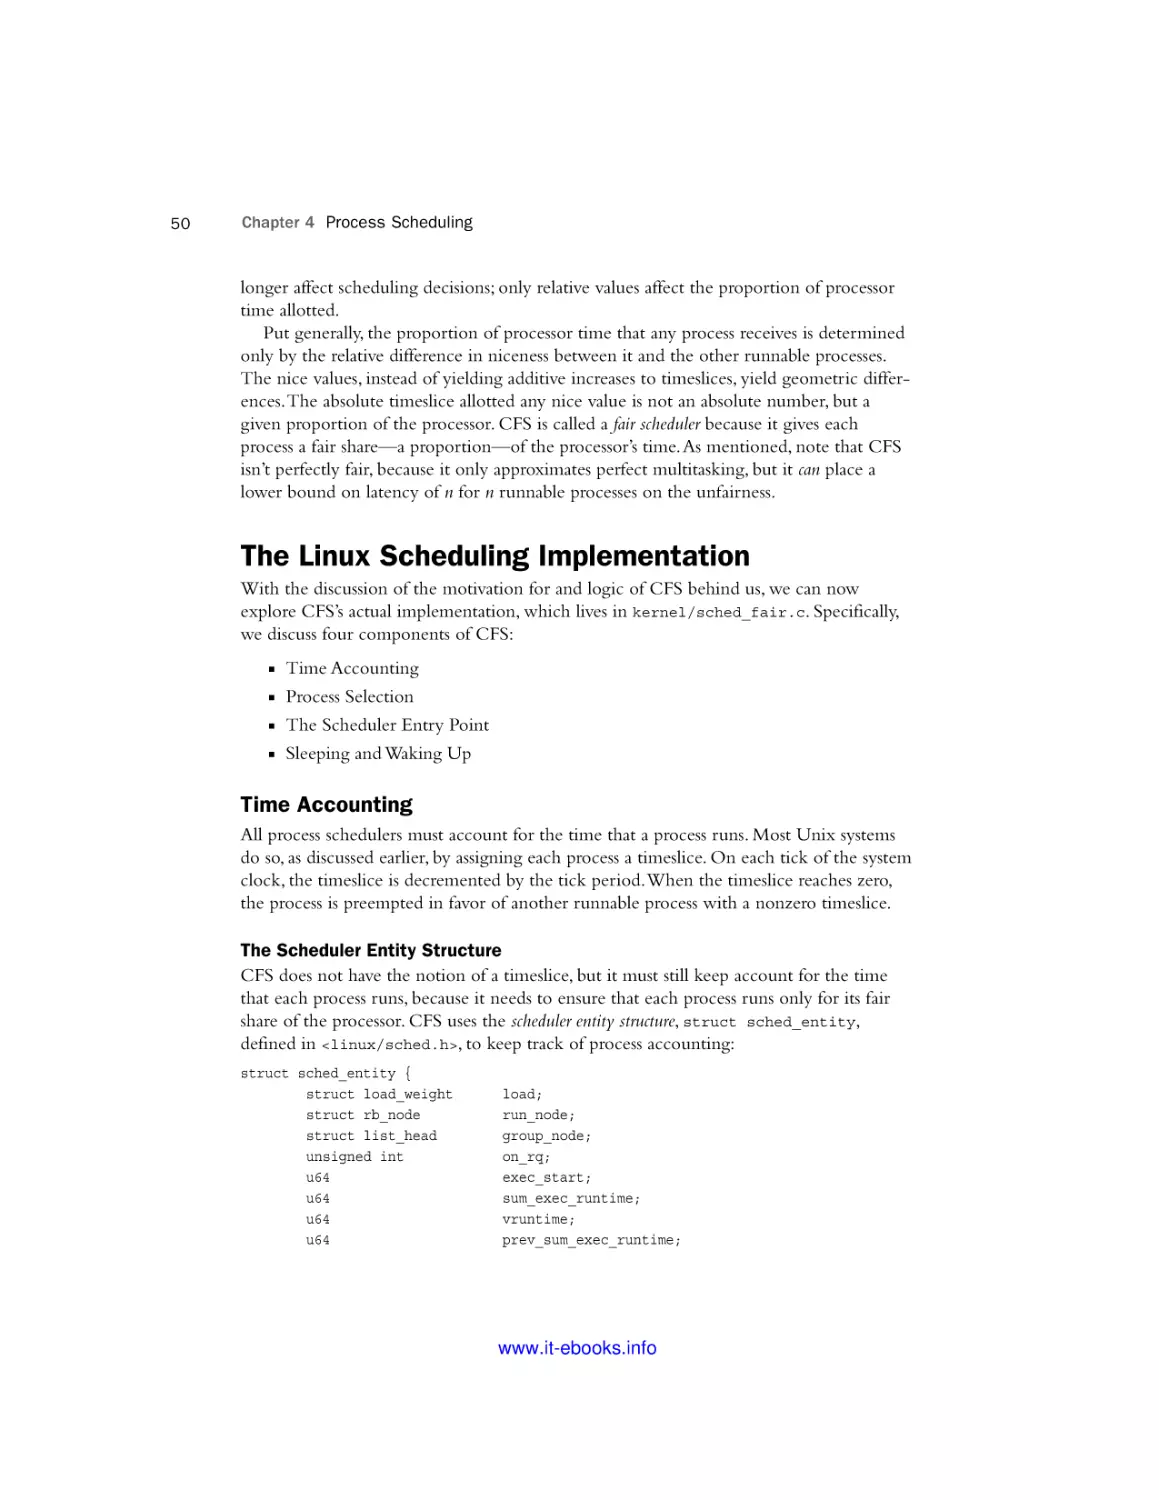 The Linux Scheduling Implementation
Time Accounting